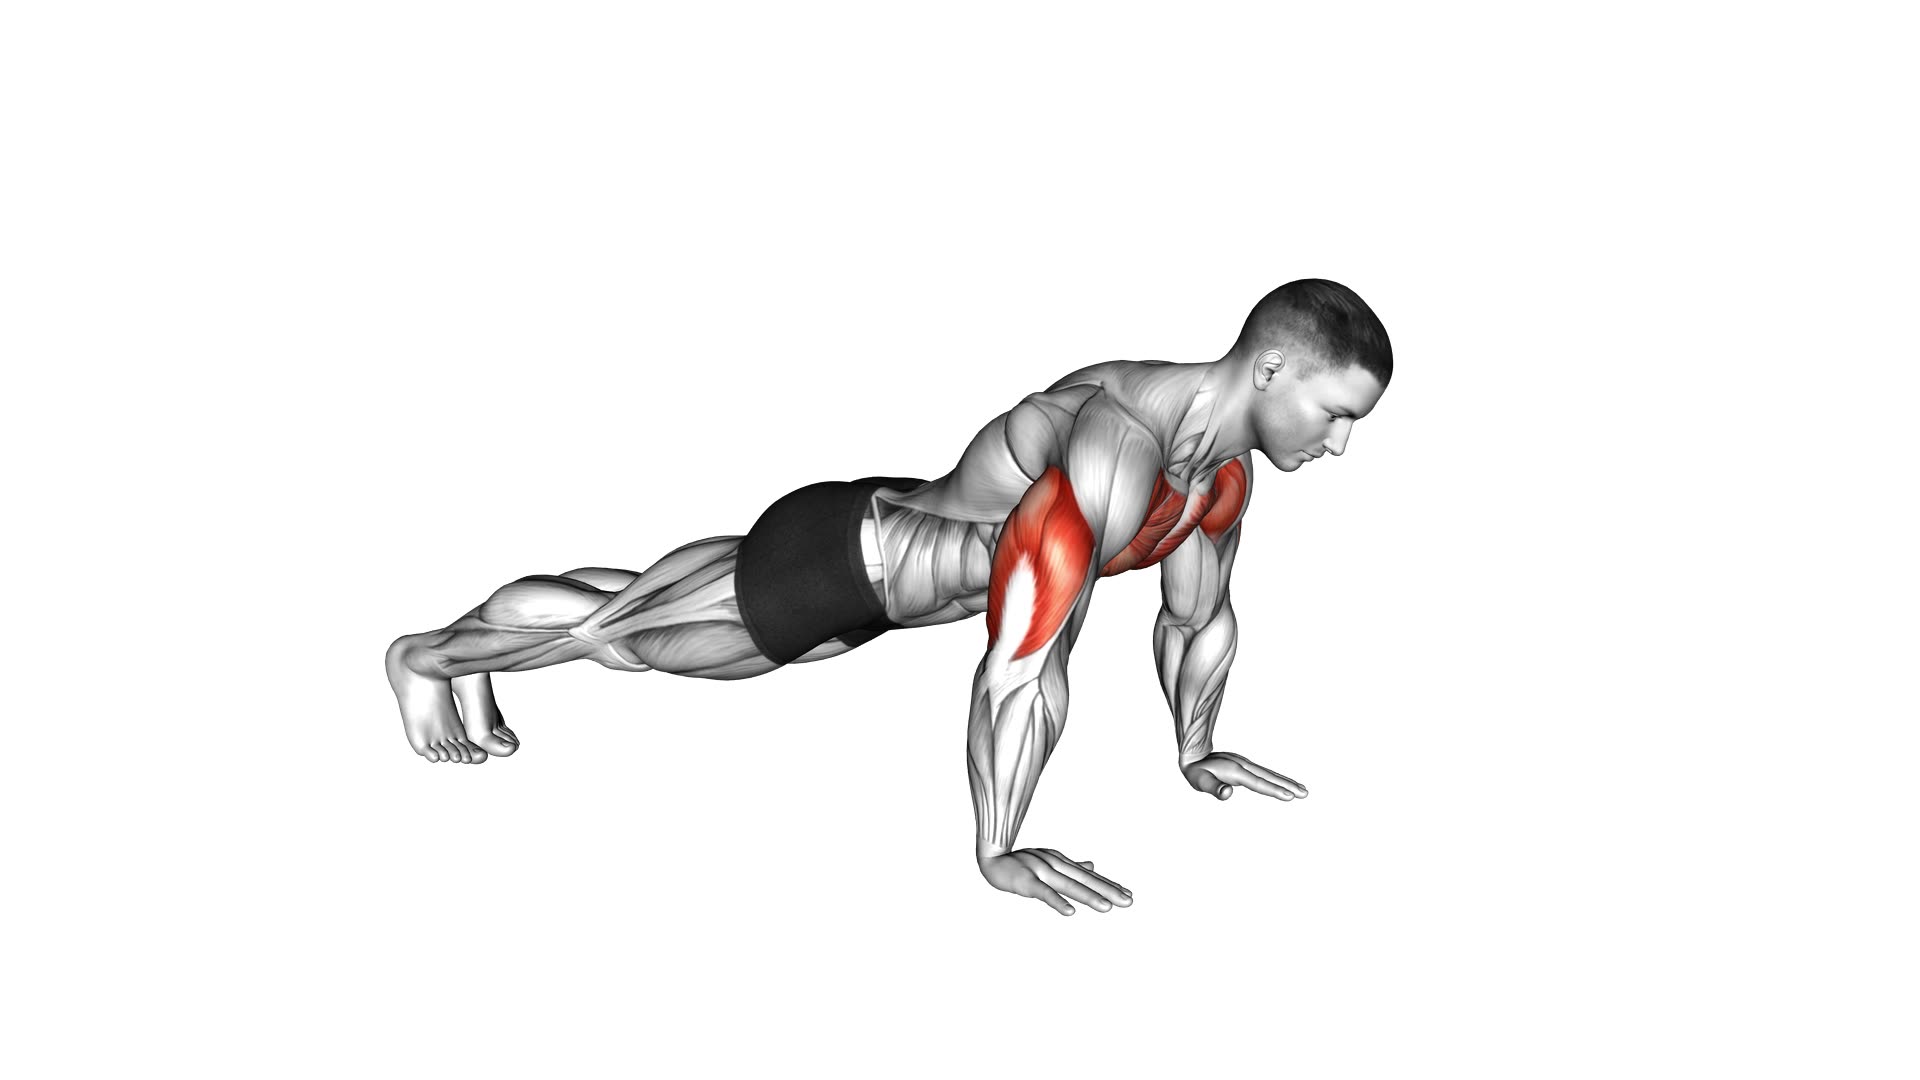 Clock Push-Up - Video Exercise Guide & Tips